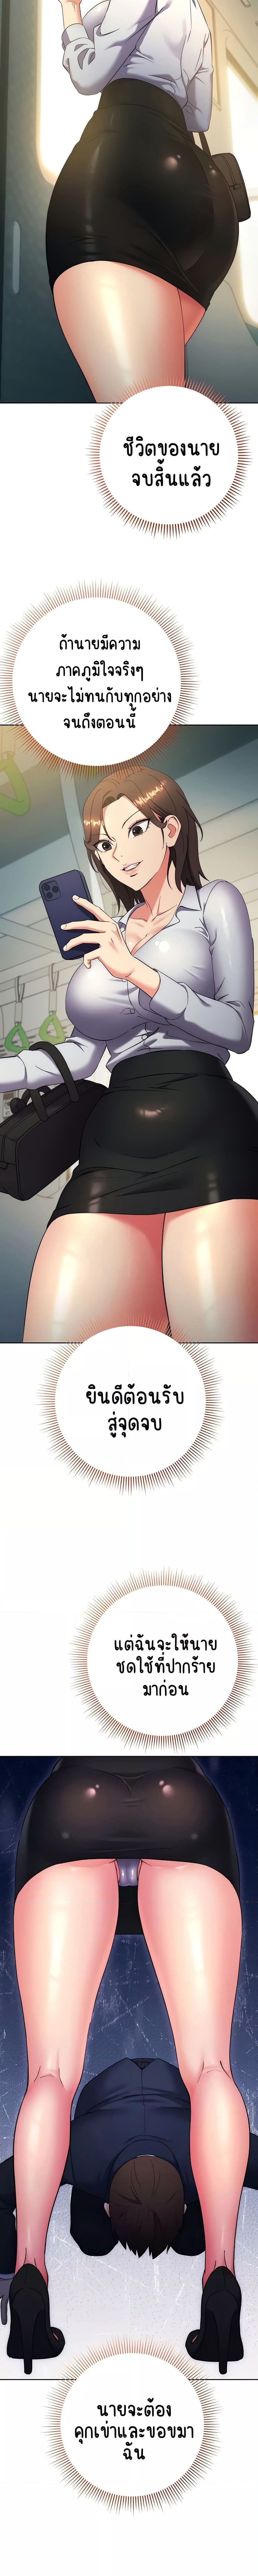 Outsider: The Invisible Man ตอนที่ 9 ภาพ 8